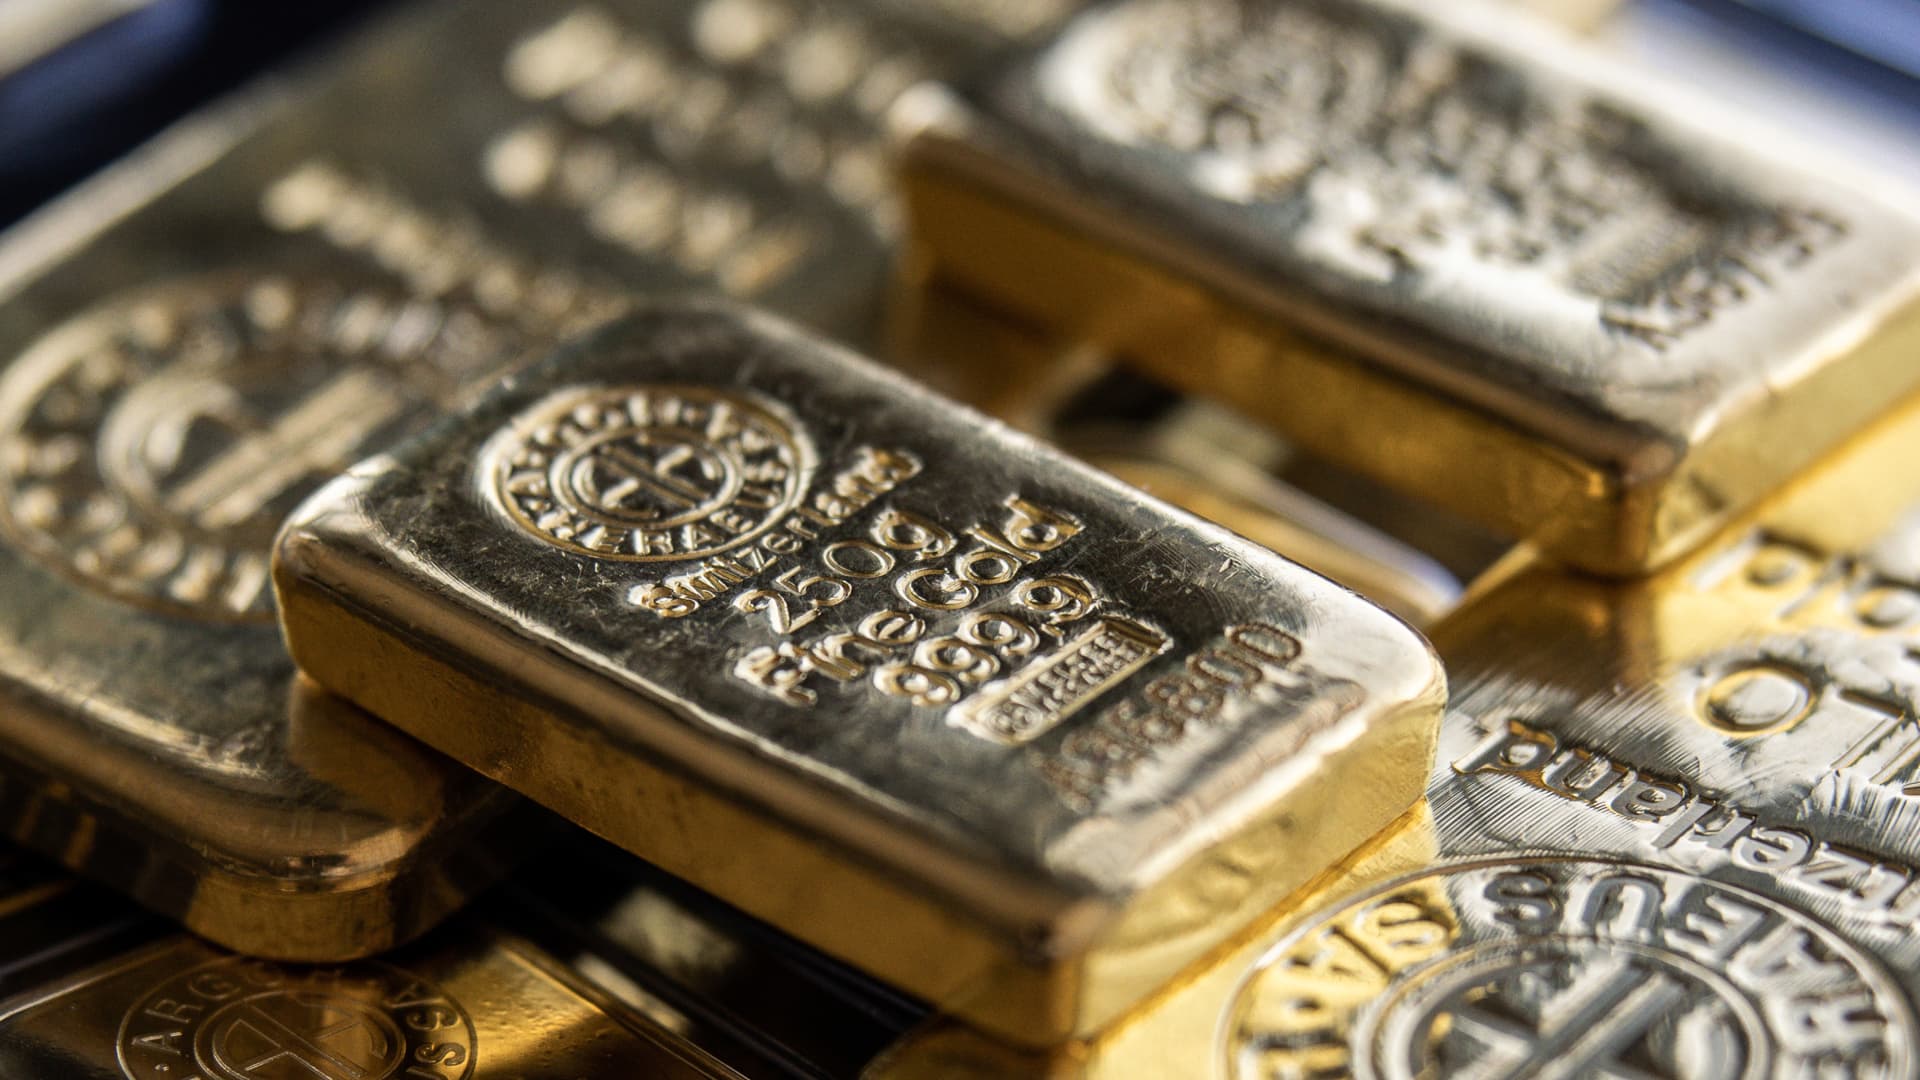 The most important revenue managers are flocking to gold as inflation fears intensify